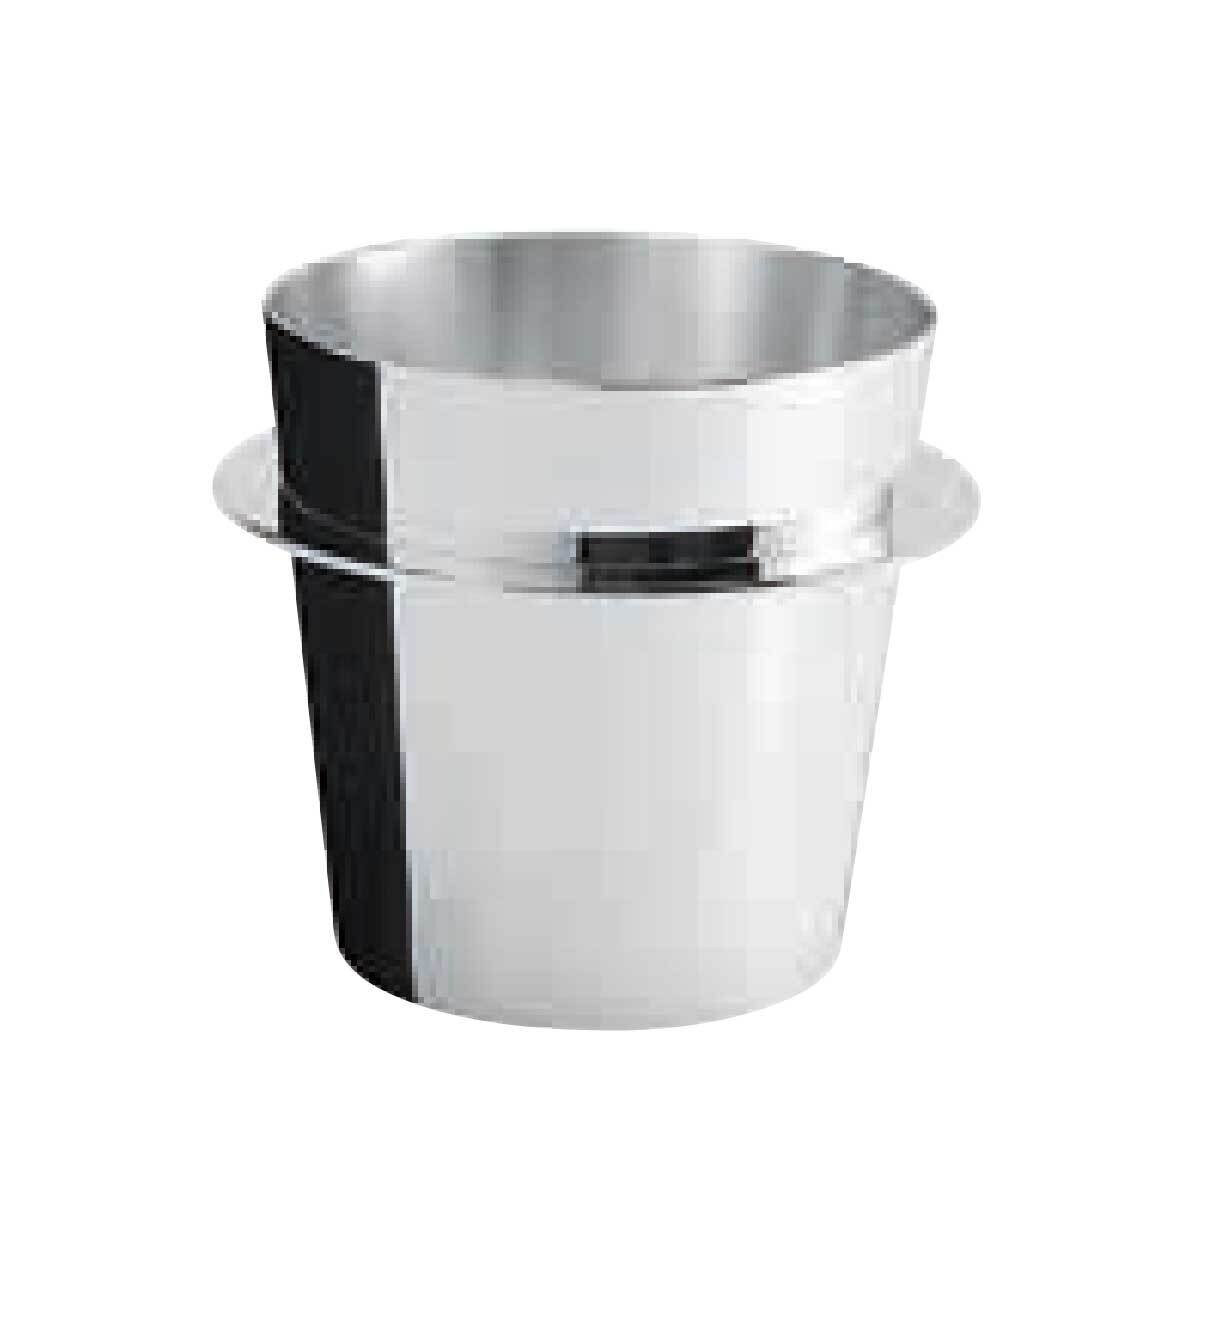 Ercuis Saturne Ice Bucket 4.875 Inch Stainless Steel F444106-12